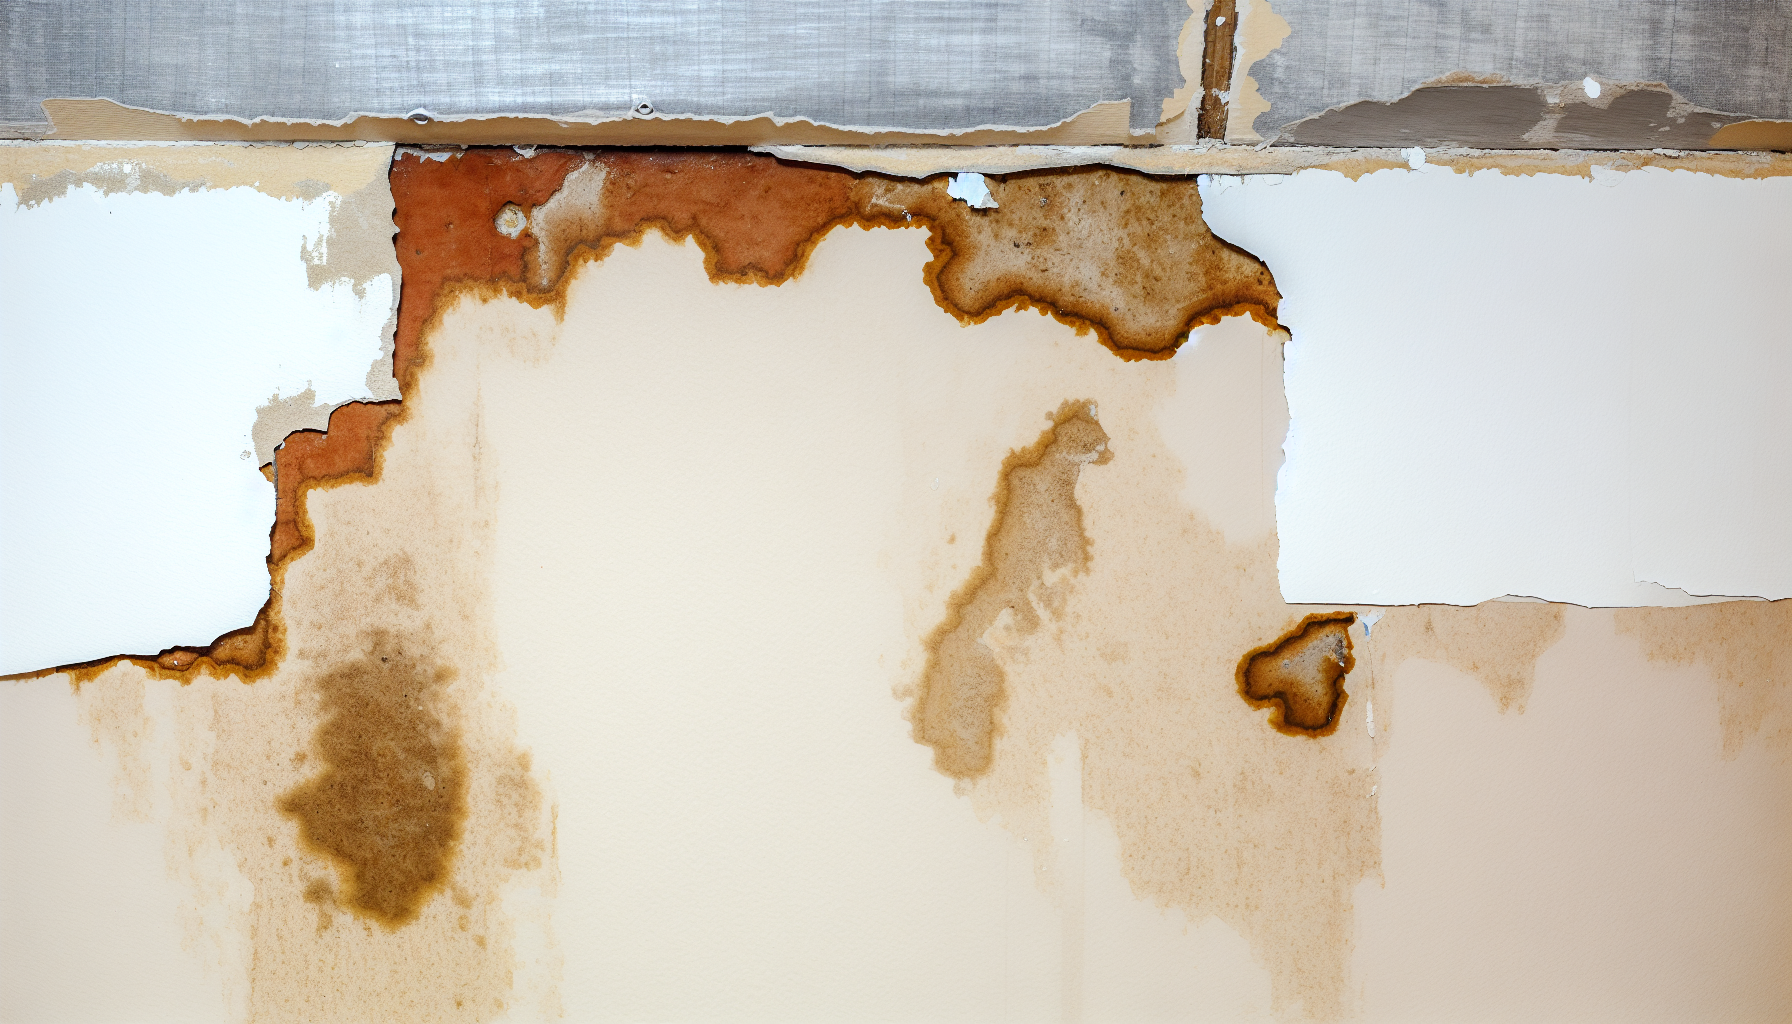 Water damaged drywall with visible brown stains and peeling paint